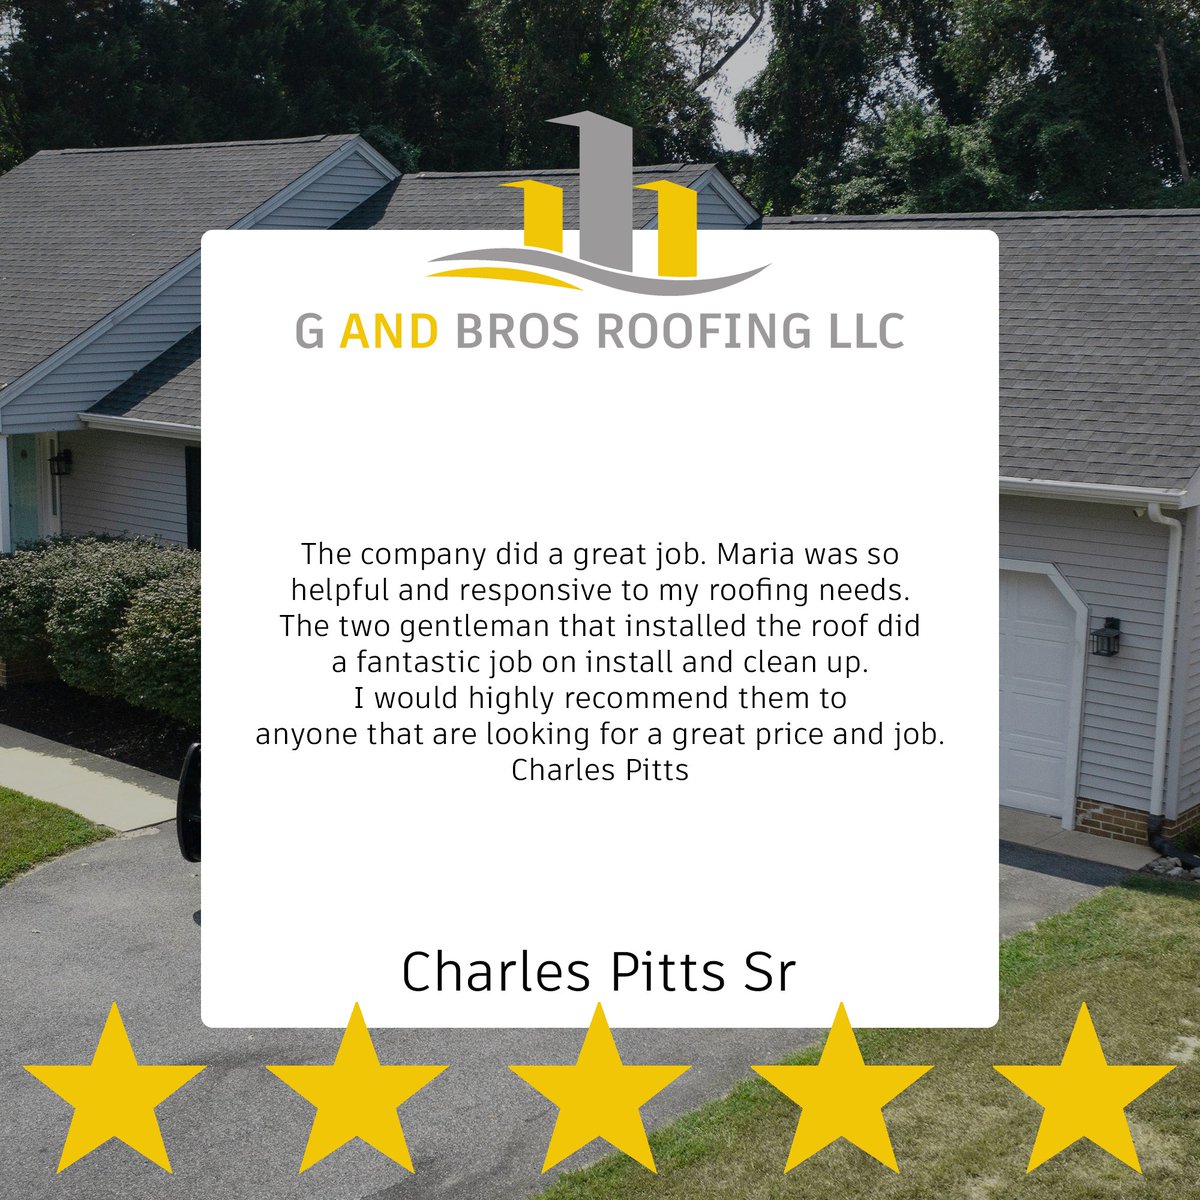 Thank you so much Charles for your review and positive feedback!

=====

#MarylandRoofing #roofing #roof #roofer #contractor #roofingcontractor #rooftop #homeimprovement #freeinspection #newroof #roofinglife #gutters #marylandroof #winddamage #stormdamage #insuranceclaims